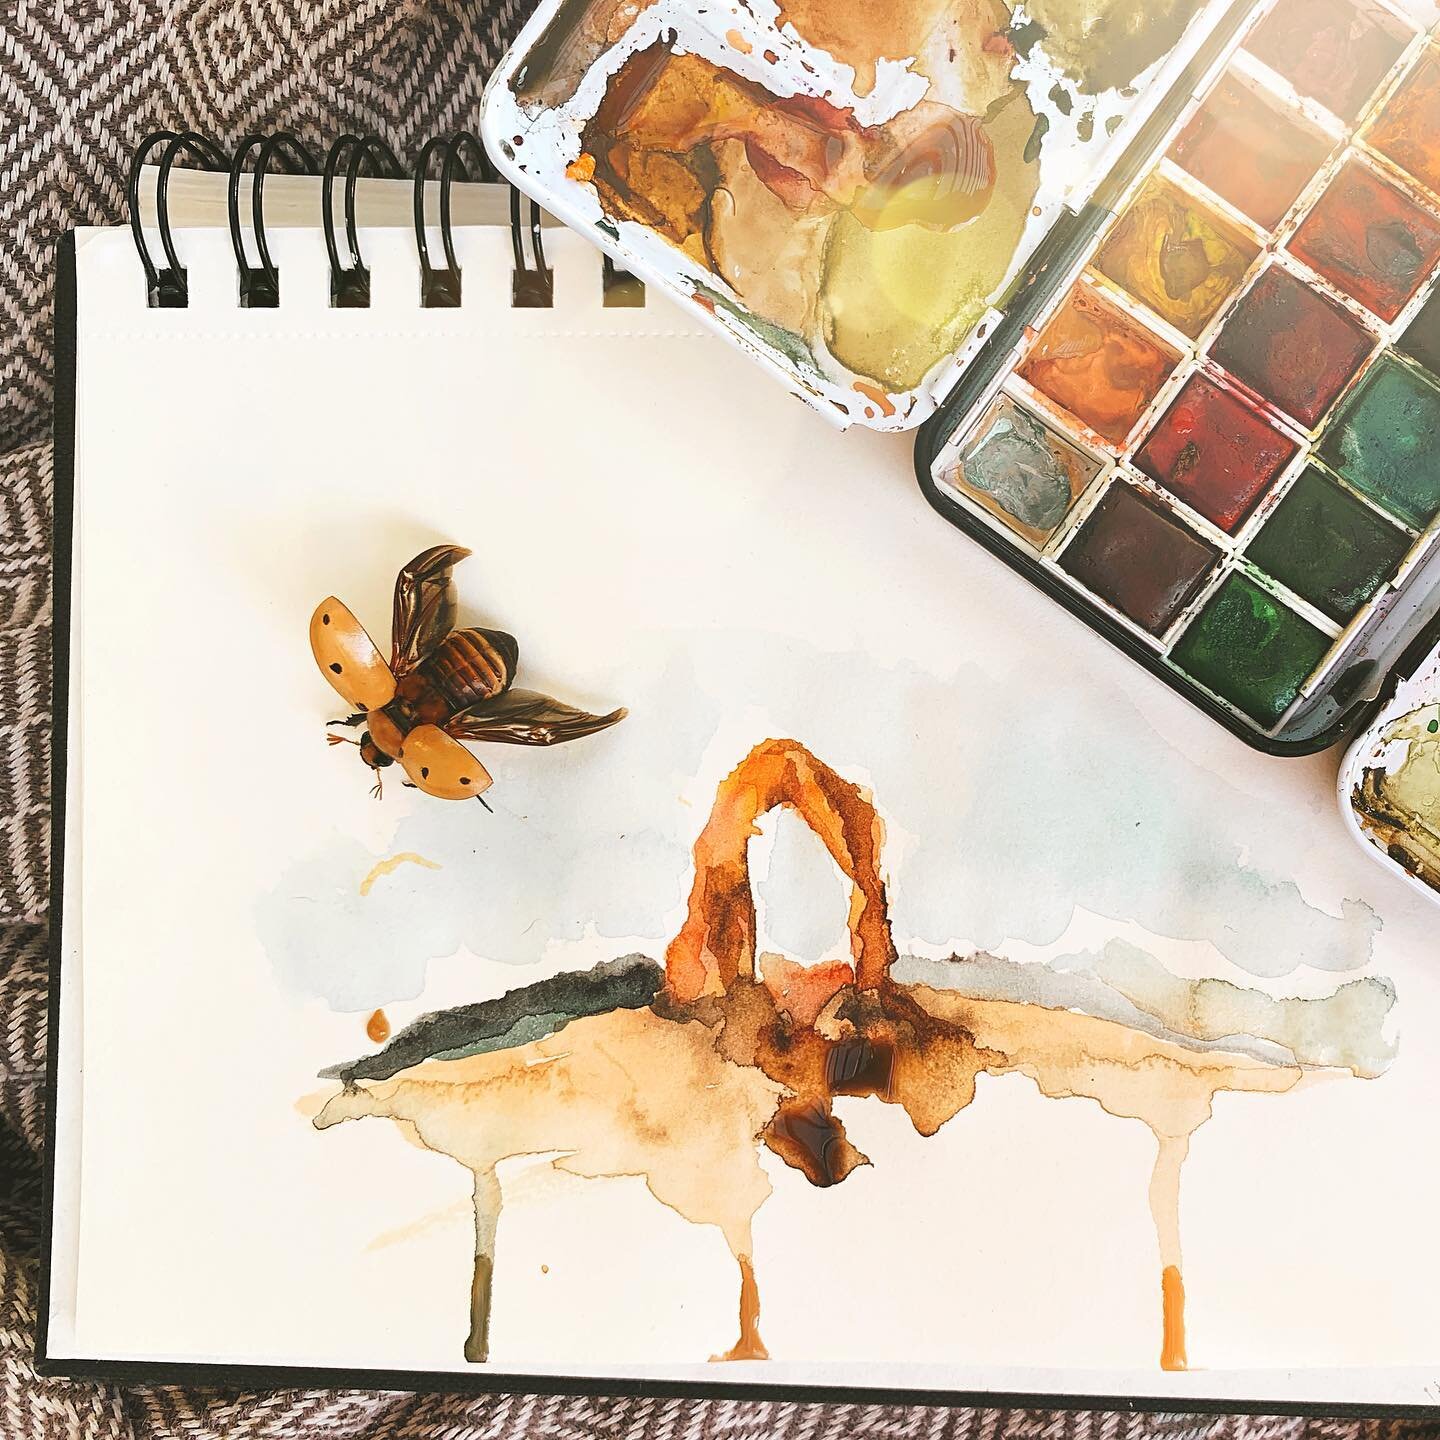 This week&rsquo;s blog post is all about Arches National Park in Moab, Utah! 🏜This watercolor painting of Delicate Arch was inspired by our trip to, and love for, the American Southwest. ❤️🌵😎 Also, check out the photo-bombing beetle! Love his colo